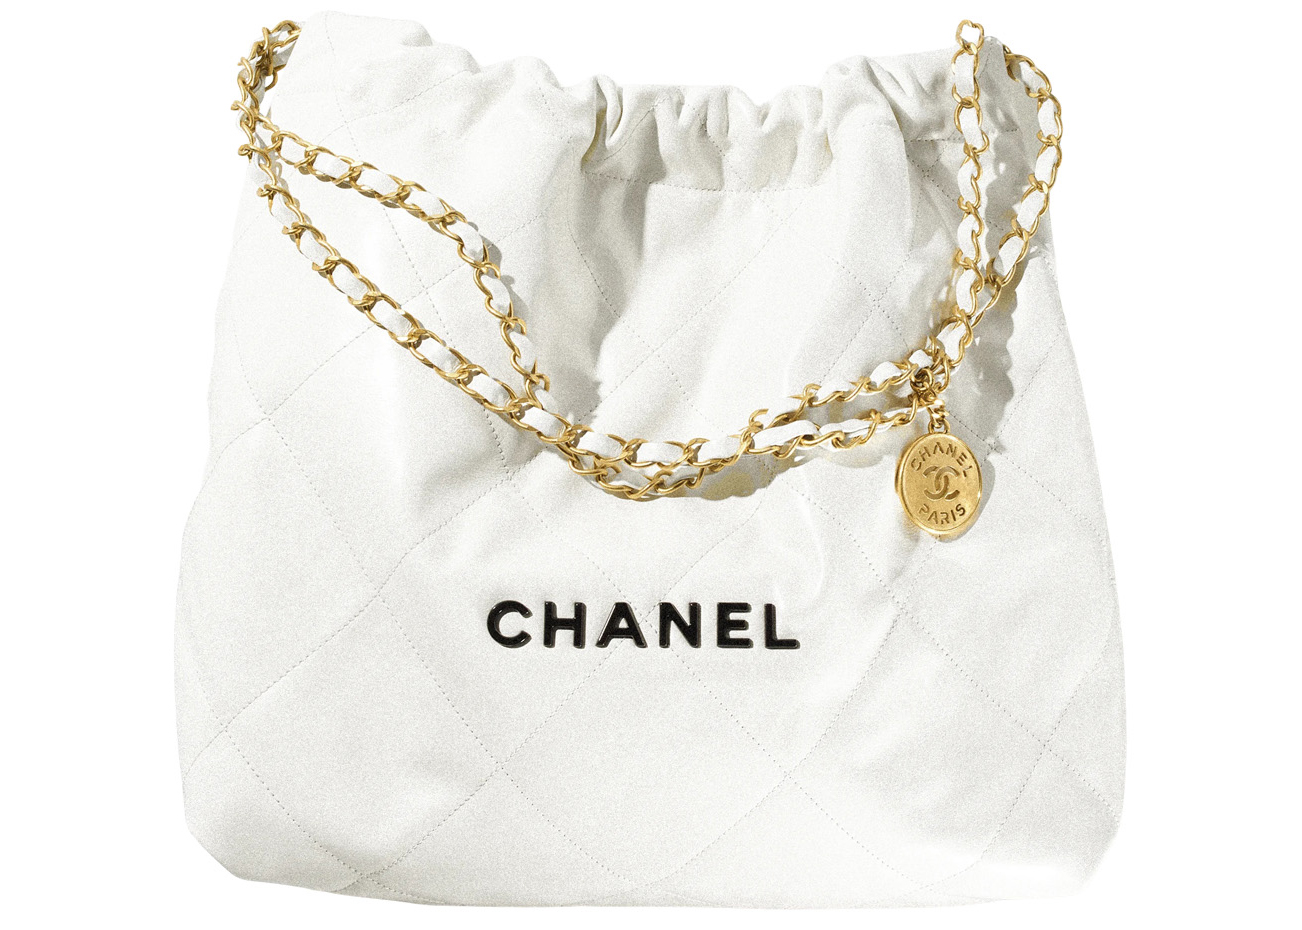 Chanel BlackWhite Quilted Leather Small Gabrielle Bucket Bag Chanel  TLC